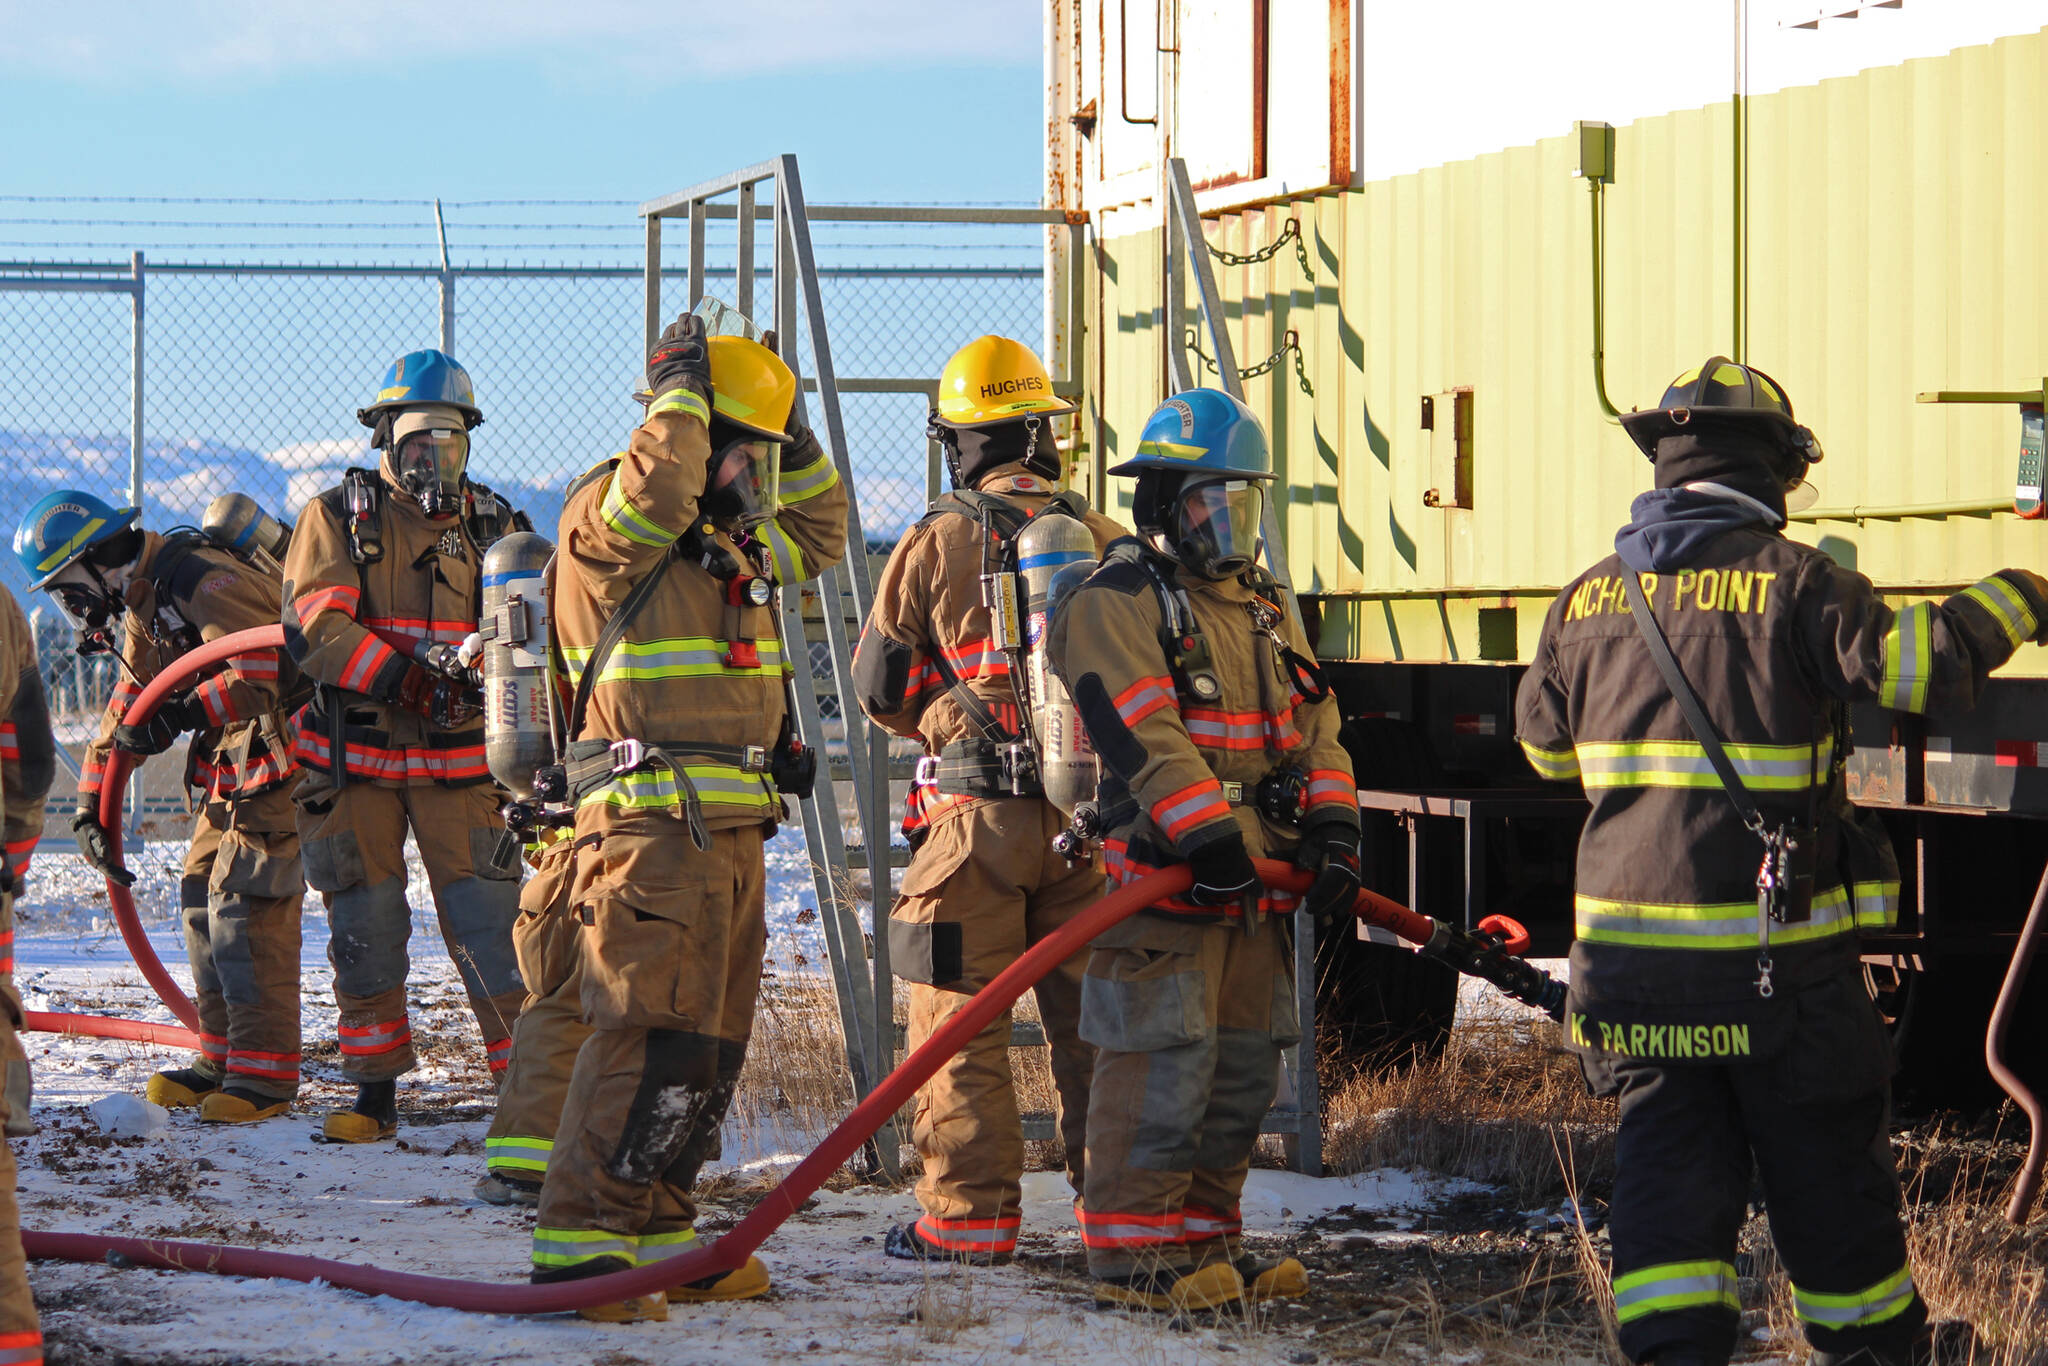 Firefighters from multiple agencies prepare to enter a structure with a fire burning inside it as part of a live fire exercise Saturday, Feb. 23, 2019 at the Homer Volunteer Fire Department’s fire training facility on Freight Dock Road in Homer, Alaska. Student volunteers from Anchor Point Emergency Services, Homer Volunteer Fire Department, Ninilchik Emergency Services, and Central Emergency Services attended the drill as part of a joint Firefighter I class they are attending hosted by Anchor Point Fire and HVFD. (Photo by Megan Pacer/Homer News)